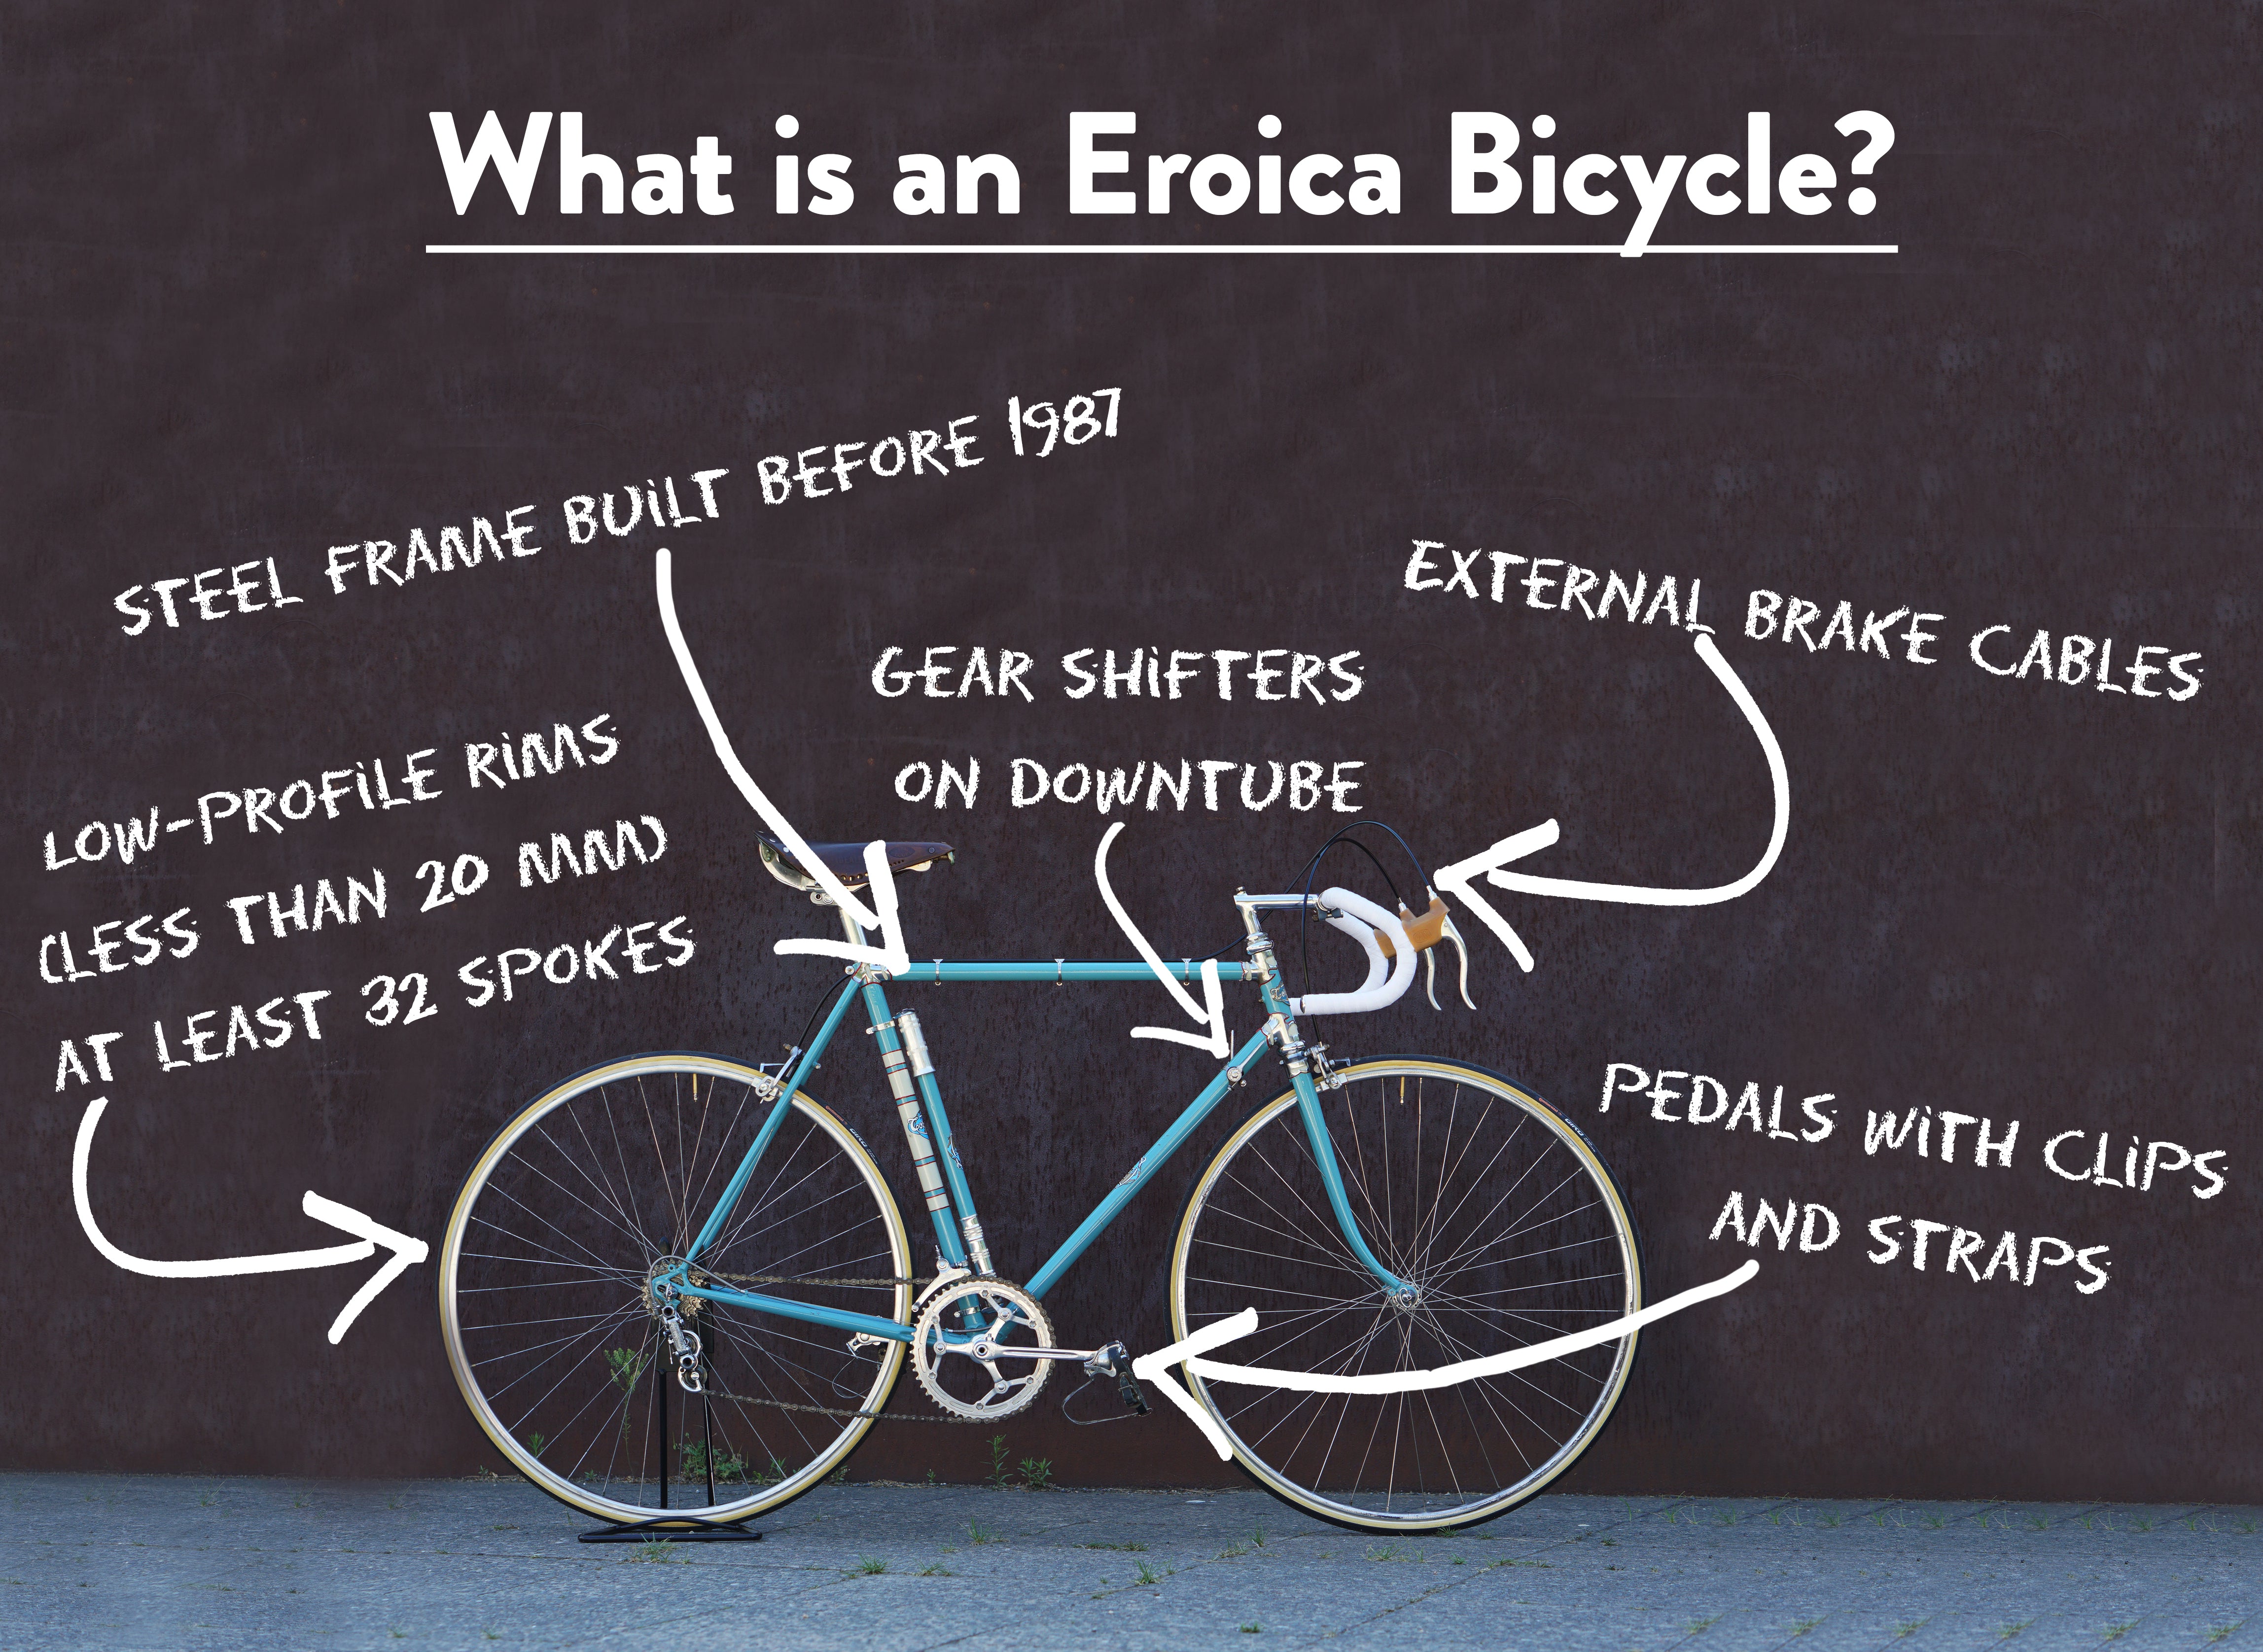 What is an Eroica bicycle